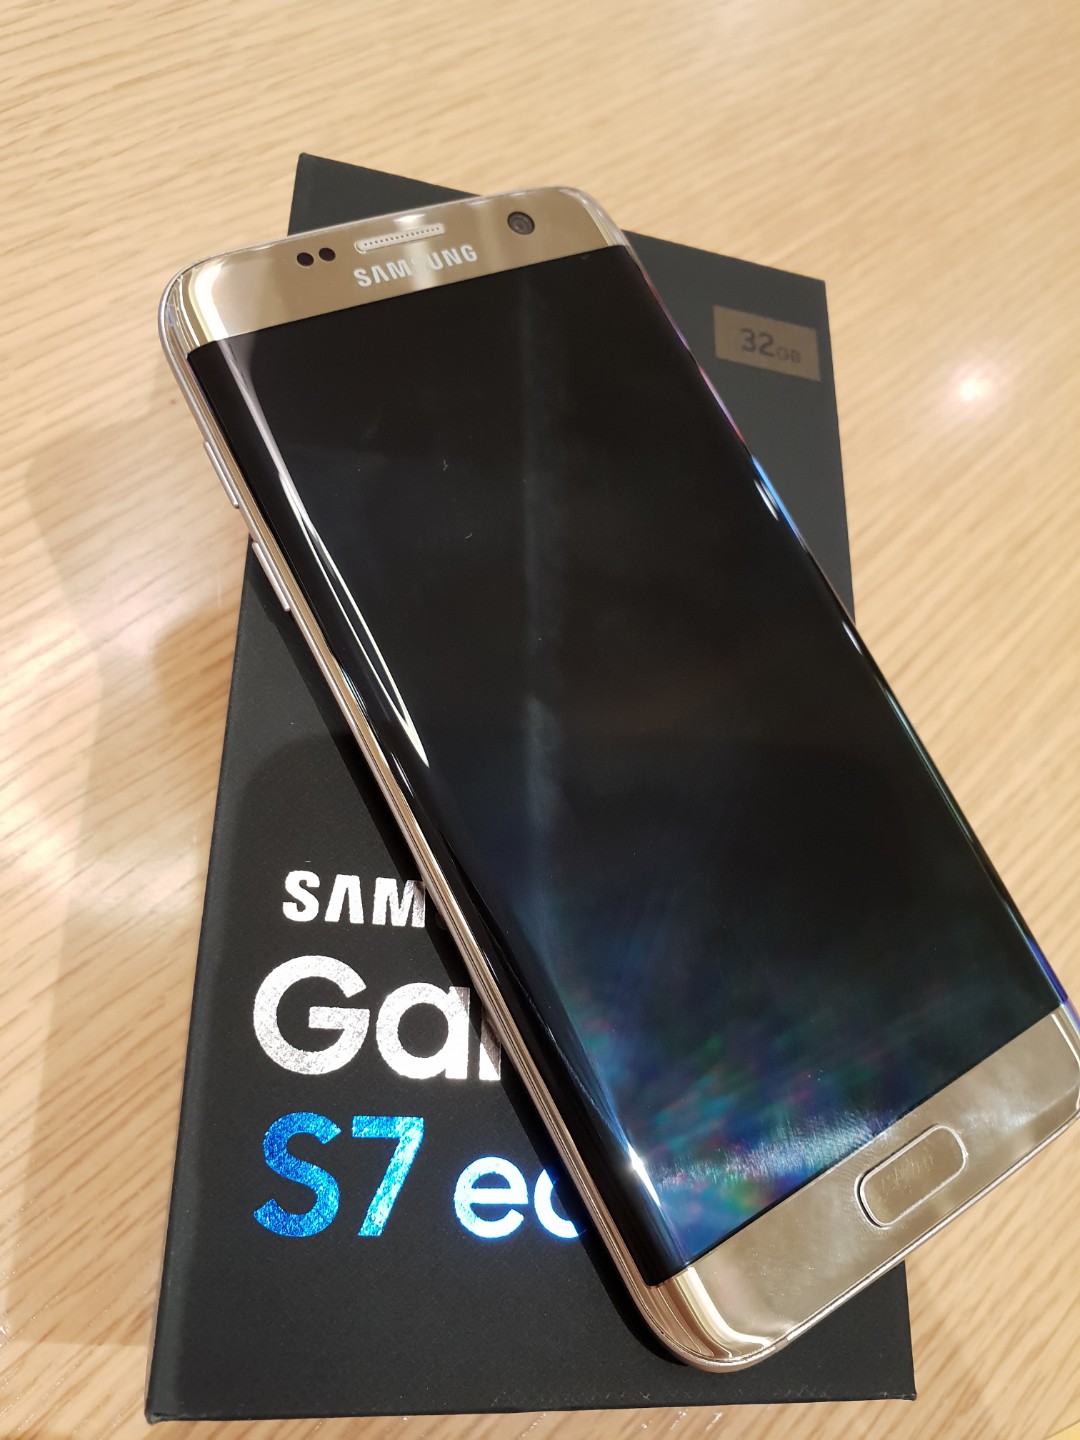 Drank Voorman landen Samsung S7 edge 32GB Gold Colour, Mobile Phones & Gadgets, Mobile Phones,  Android Phones, Samsung on Carousell